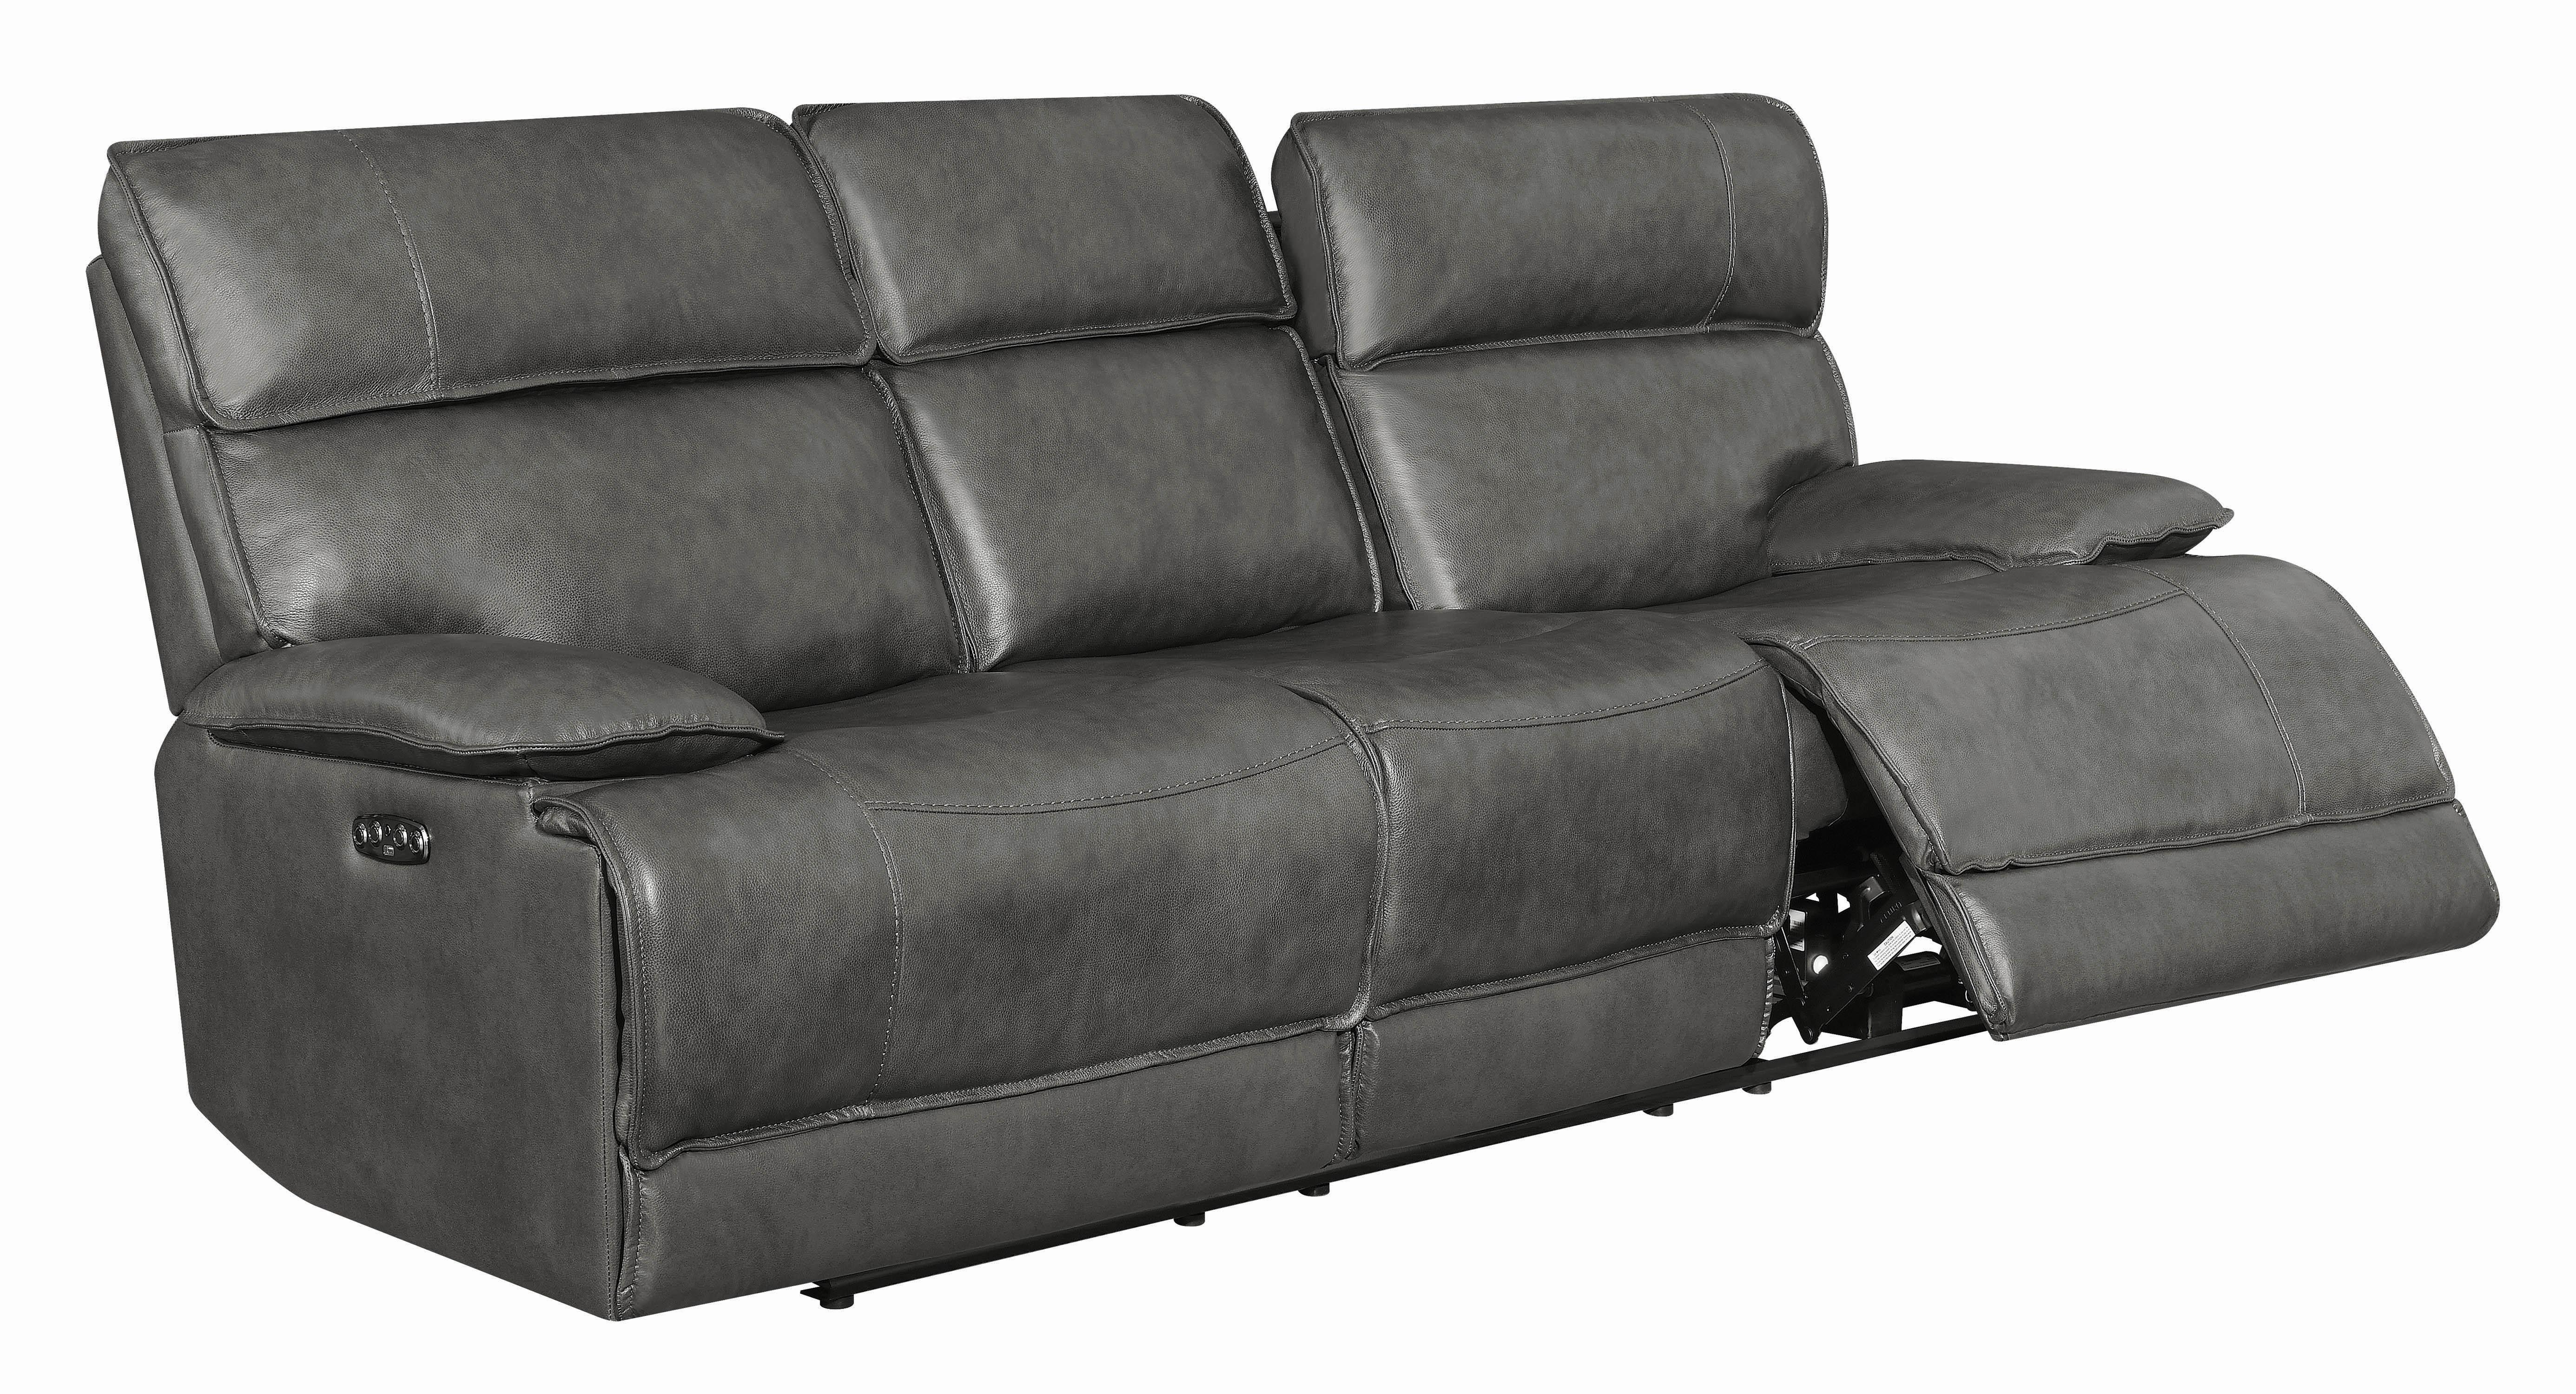 

    
650221P Modern Gray Leather Upholstery Power sofa Stanford by Coaster
